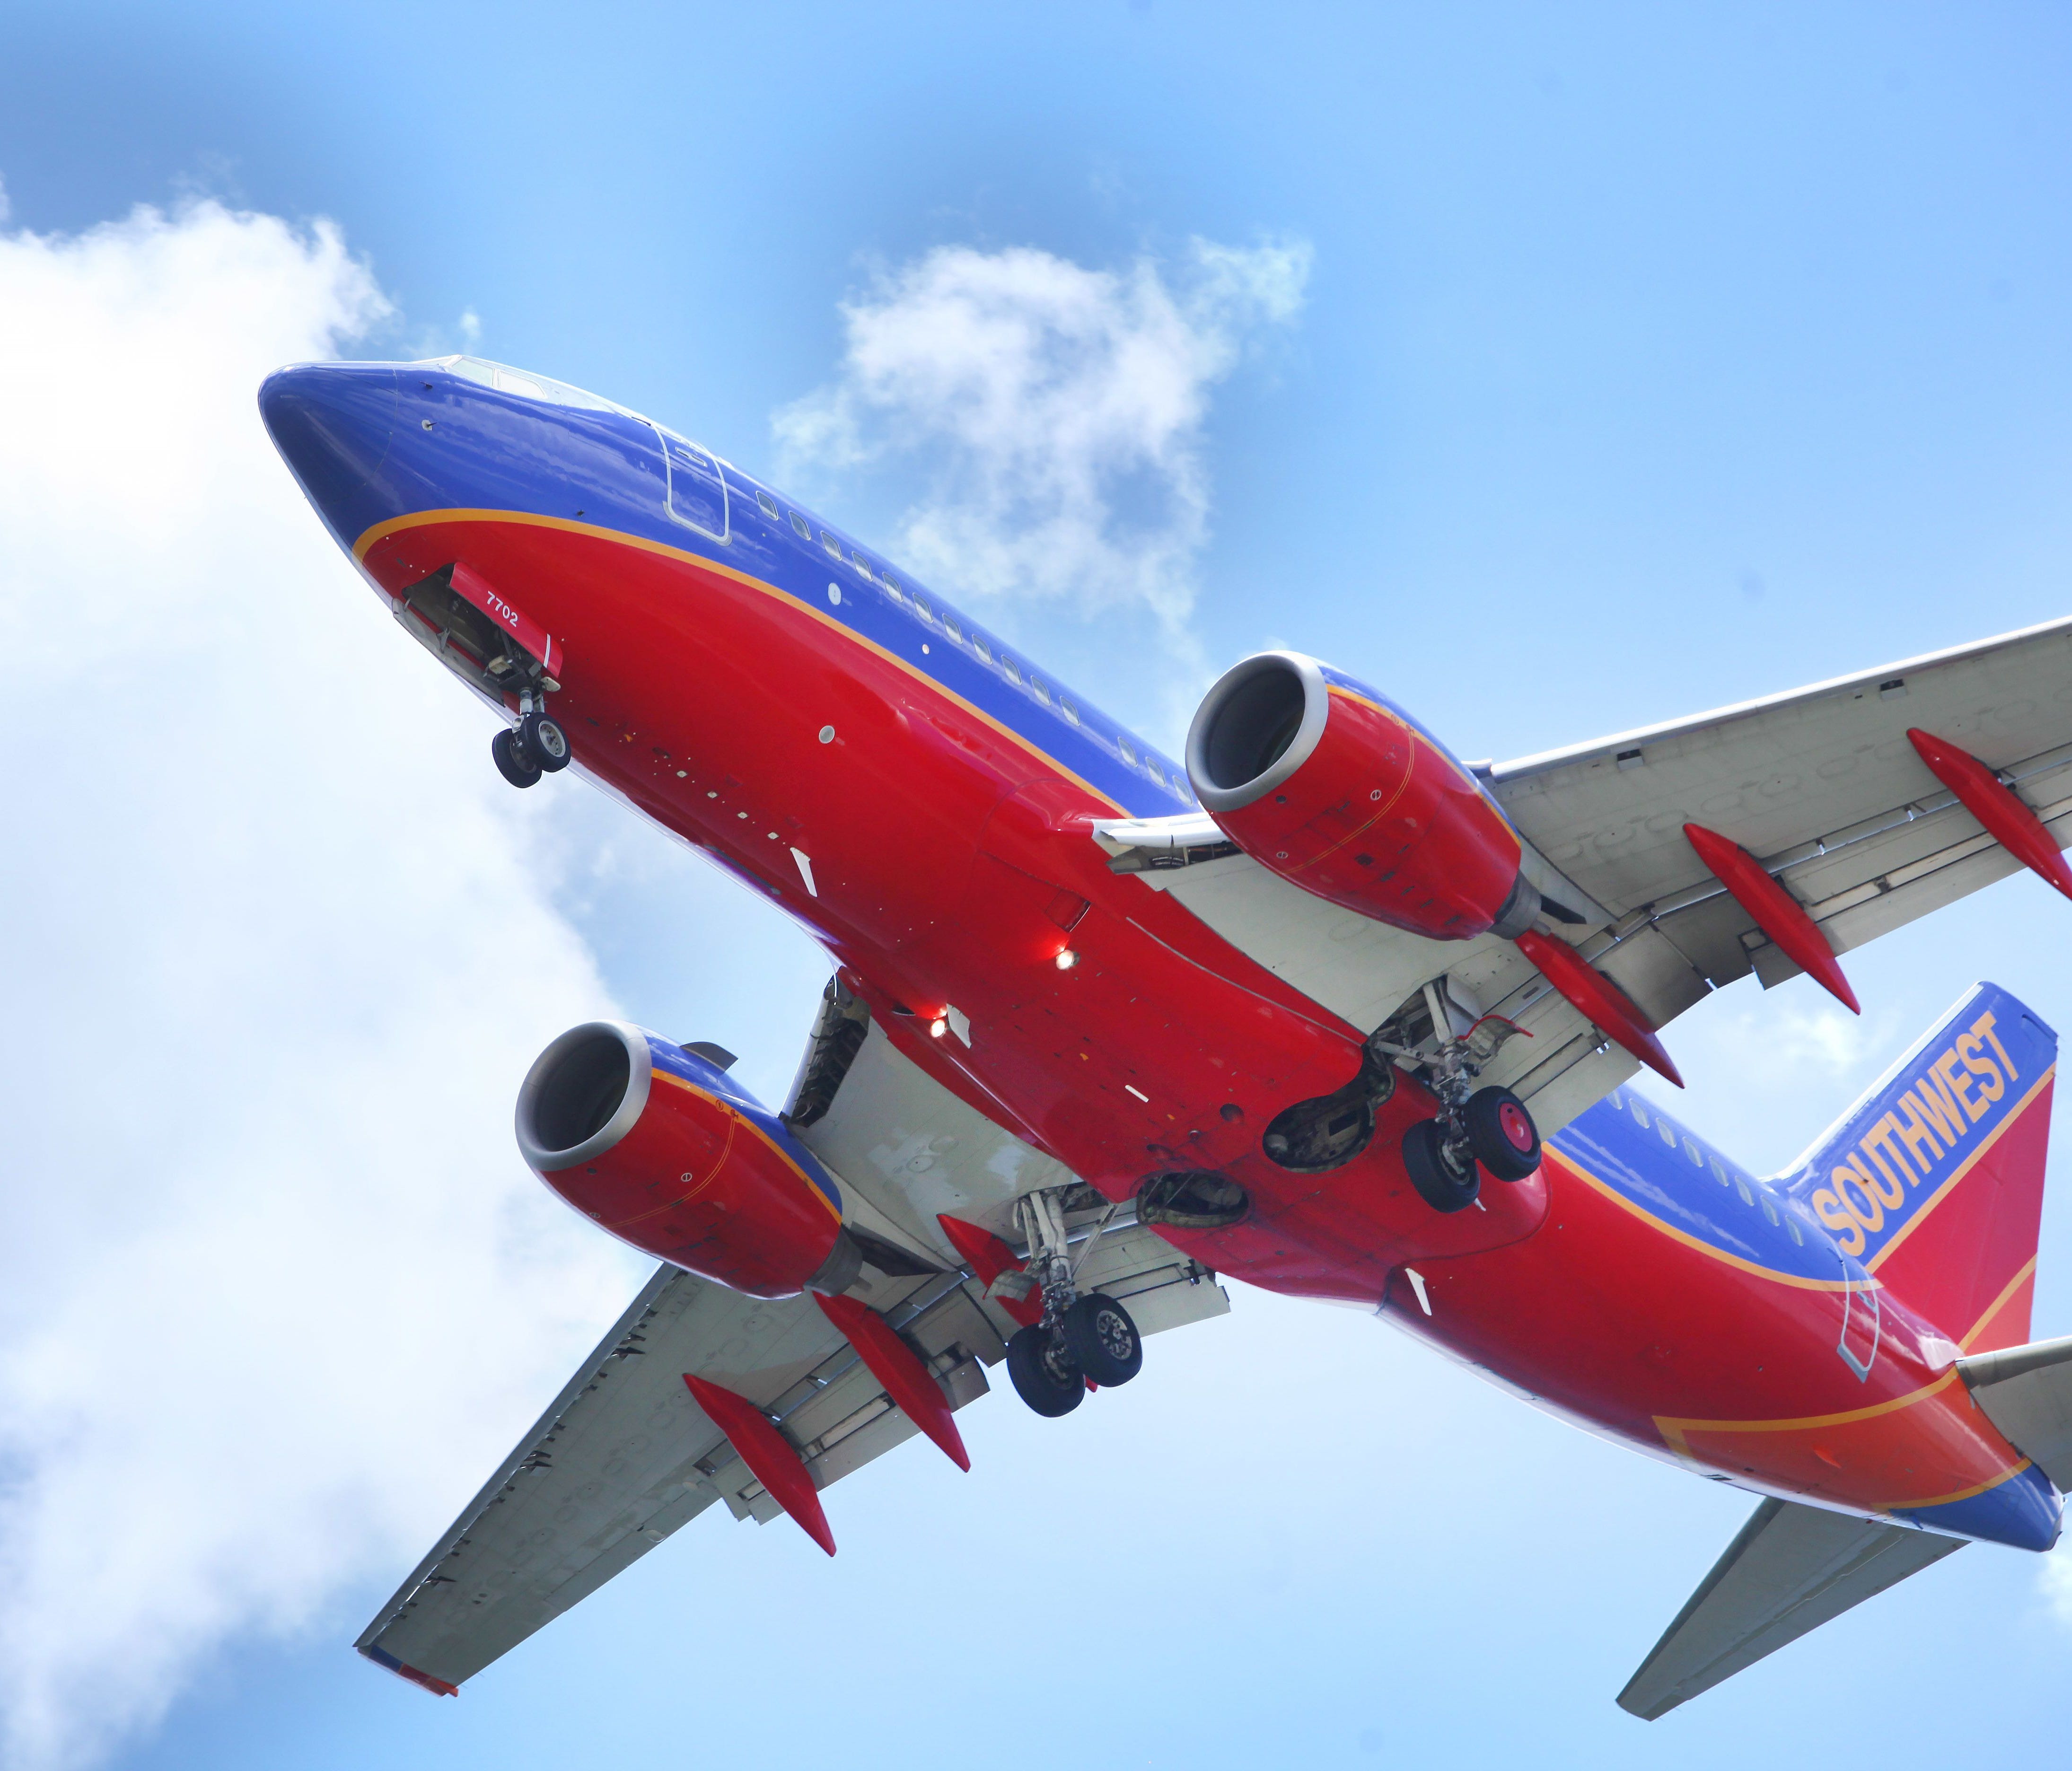 Southwest has perhaps the most liberal cancellation and change policies among U.S. carriers, but it does have a few rules that passengers with non-refundable tickets must follow, lest they forfeit their airfares.